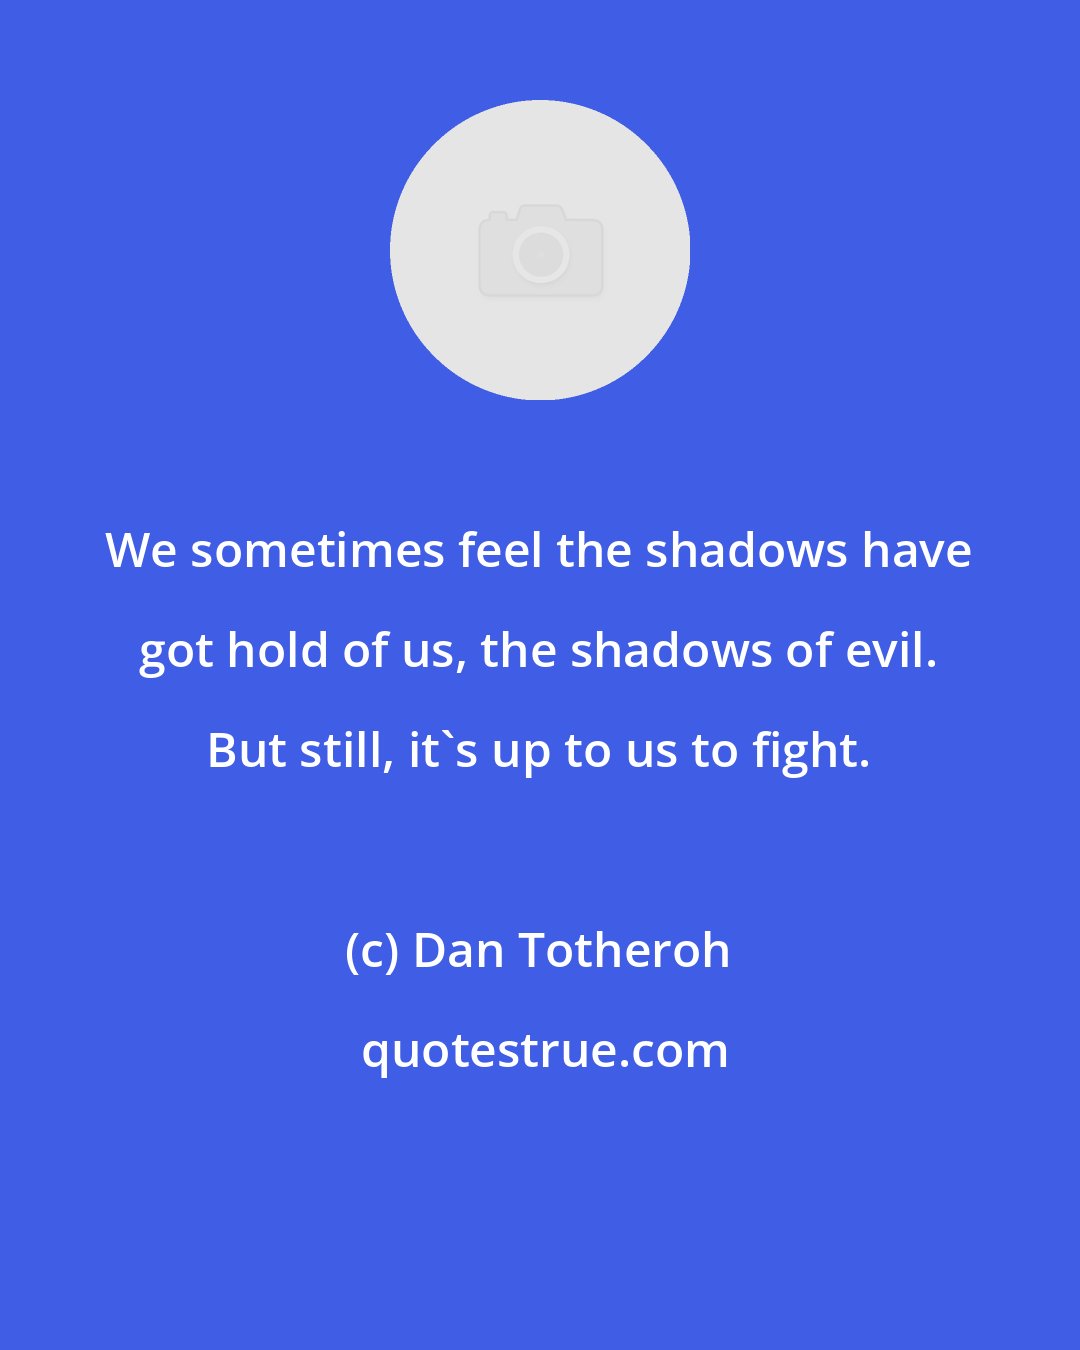 Dan Totheroh: We sometimes feel the shadows have got hold of us, the shadows of evil. But still, it's up to us to fight.